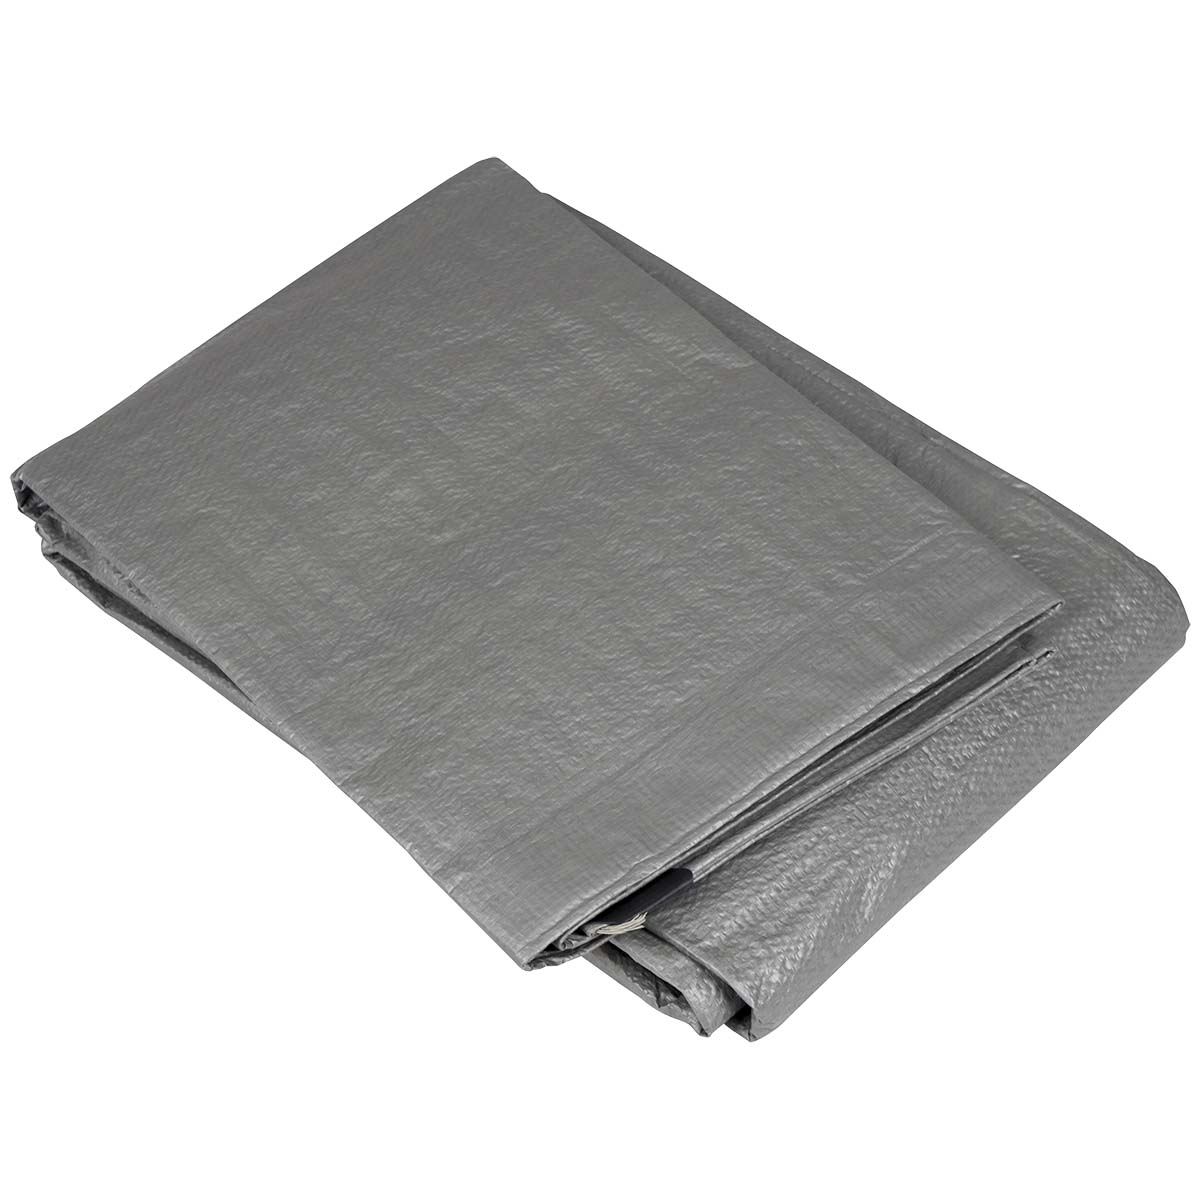 4215880 A sturdy cover sail. This sail is water proof, weather proof and high quality (120 gr/m²). With welded seams, reinforced edges and sturdy eyelets.